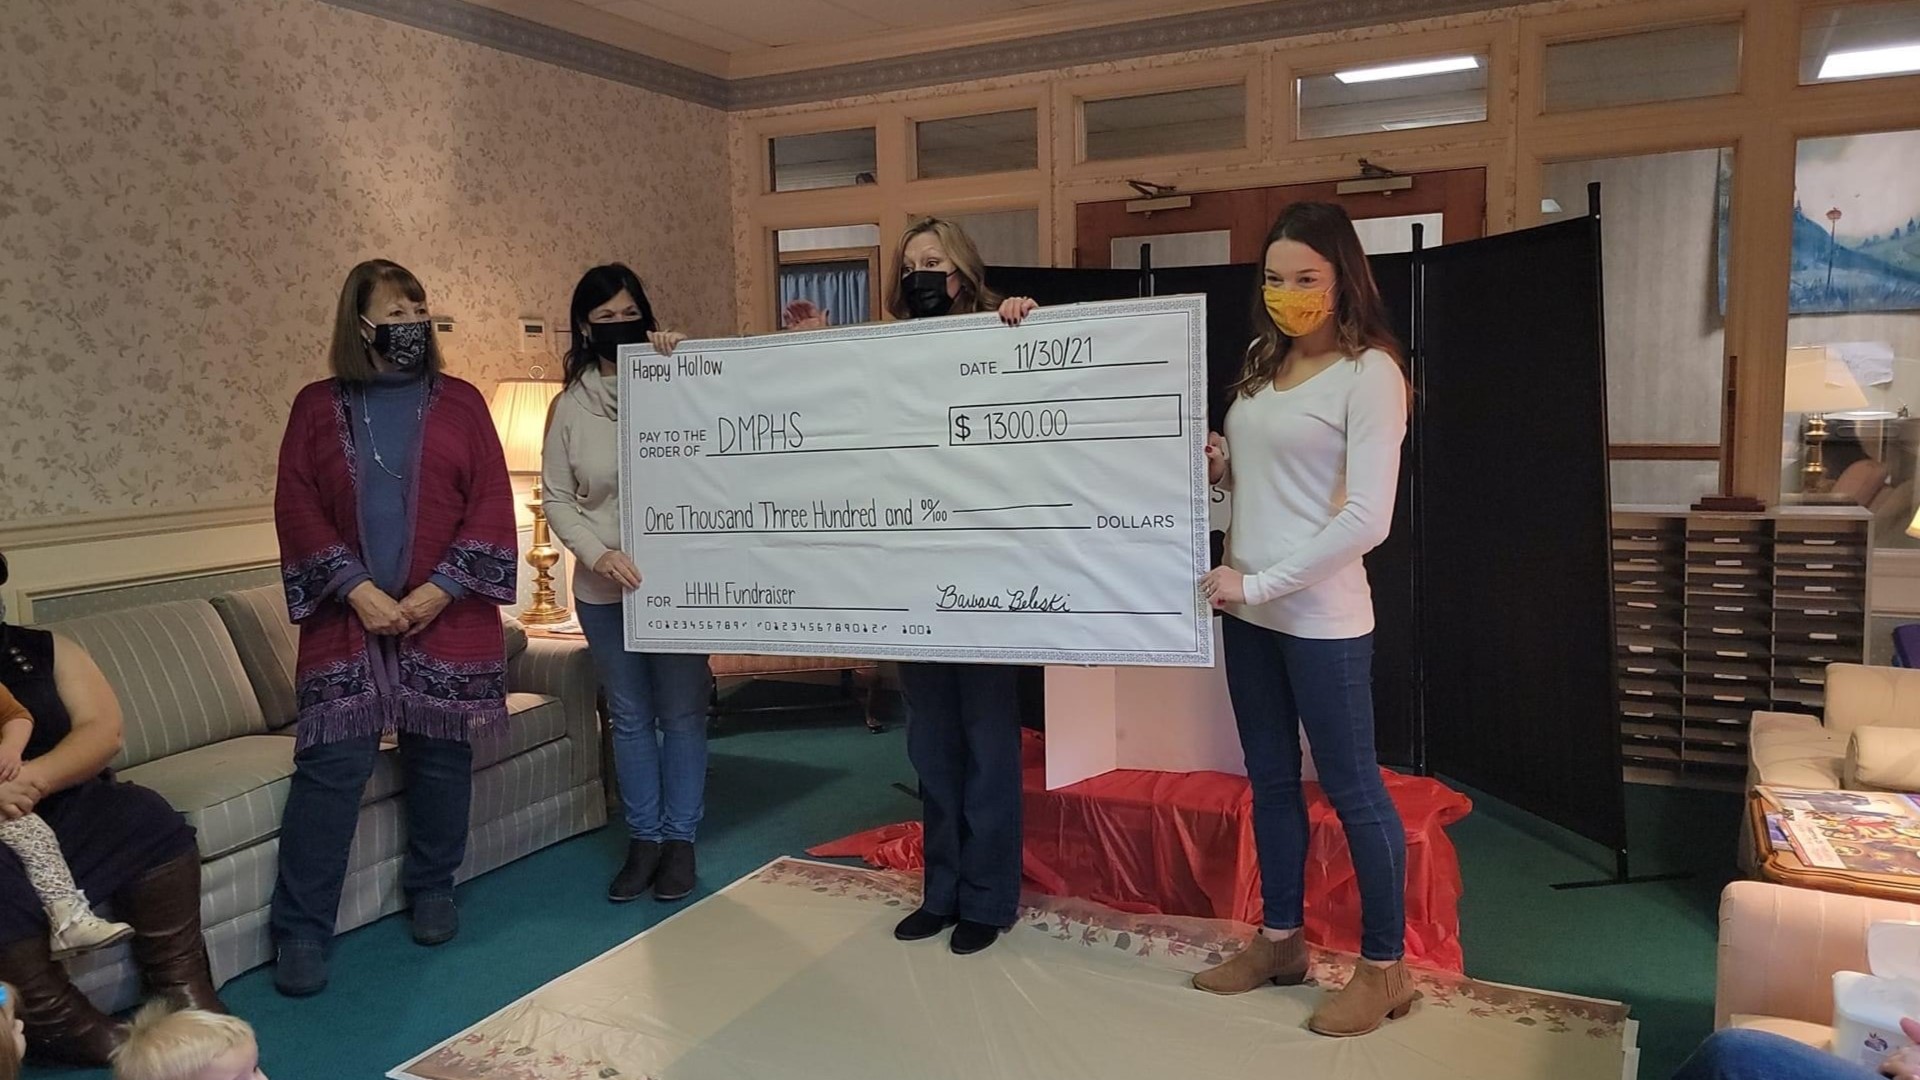 The daycare ended up raising $1,300 dollars for the historical society to help in the rebuilding process.